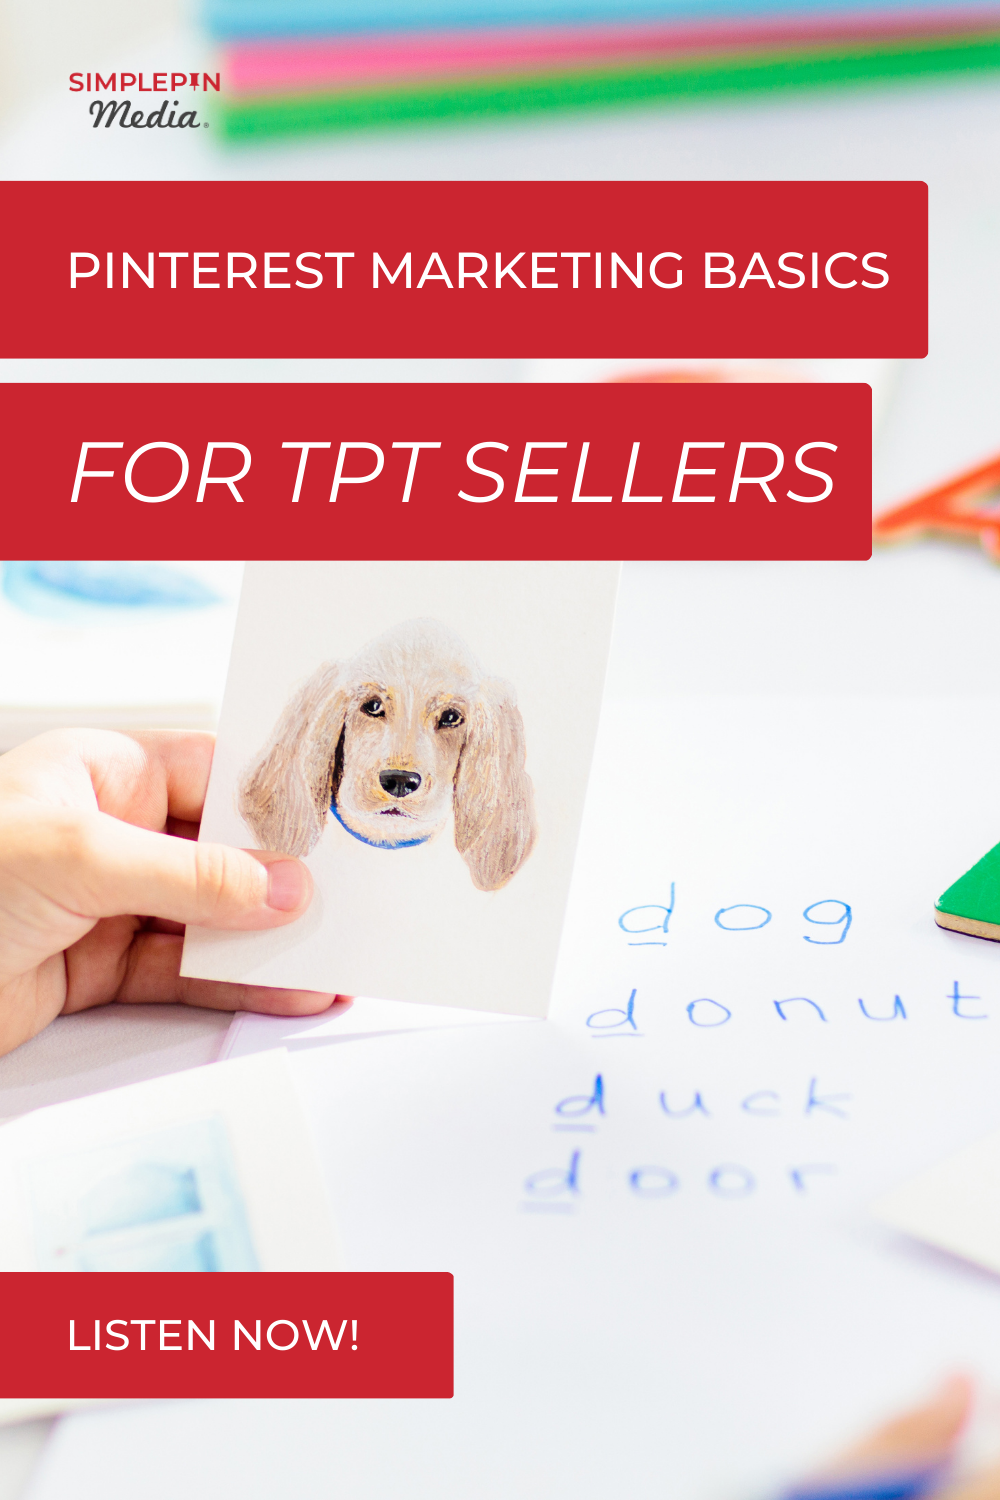 331 – Your TpT Store And Pinterest